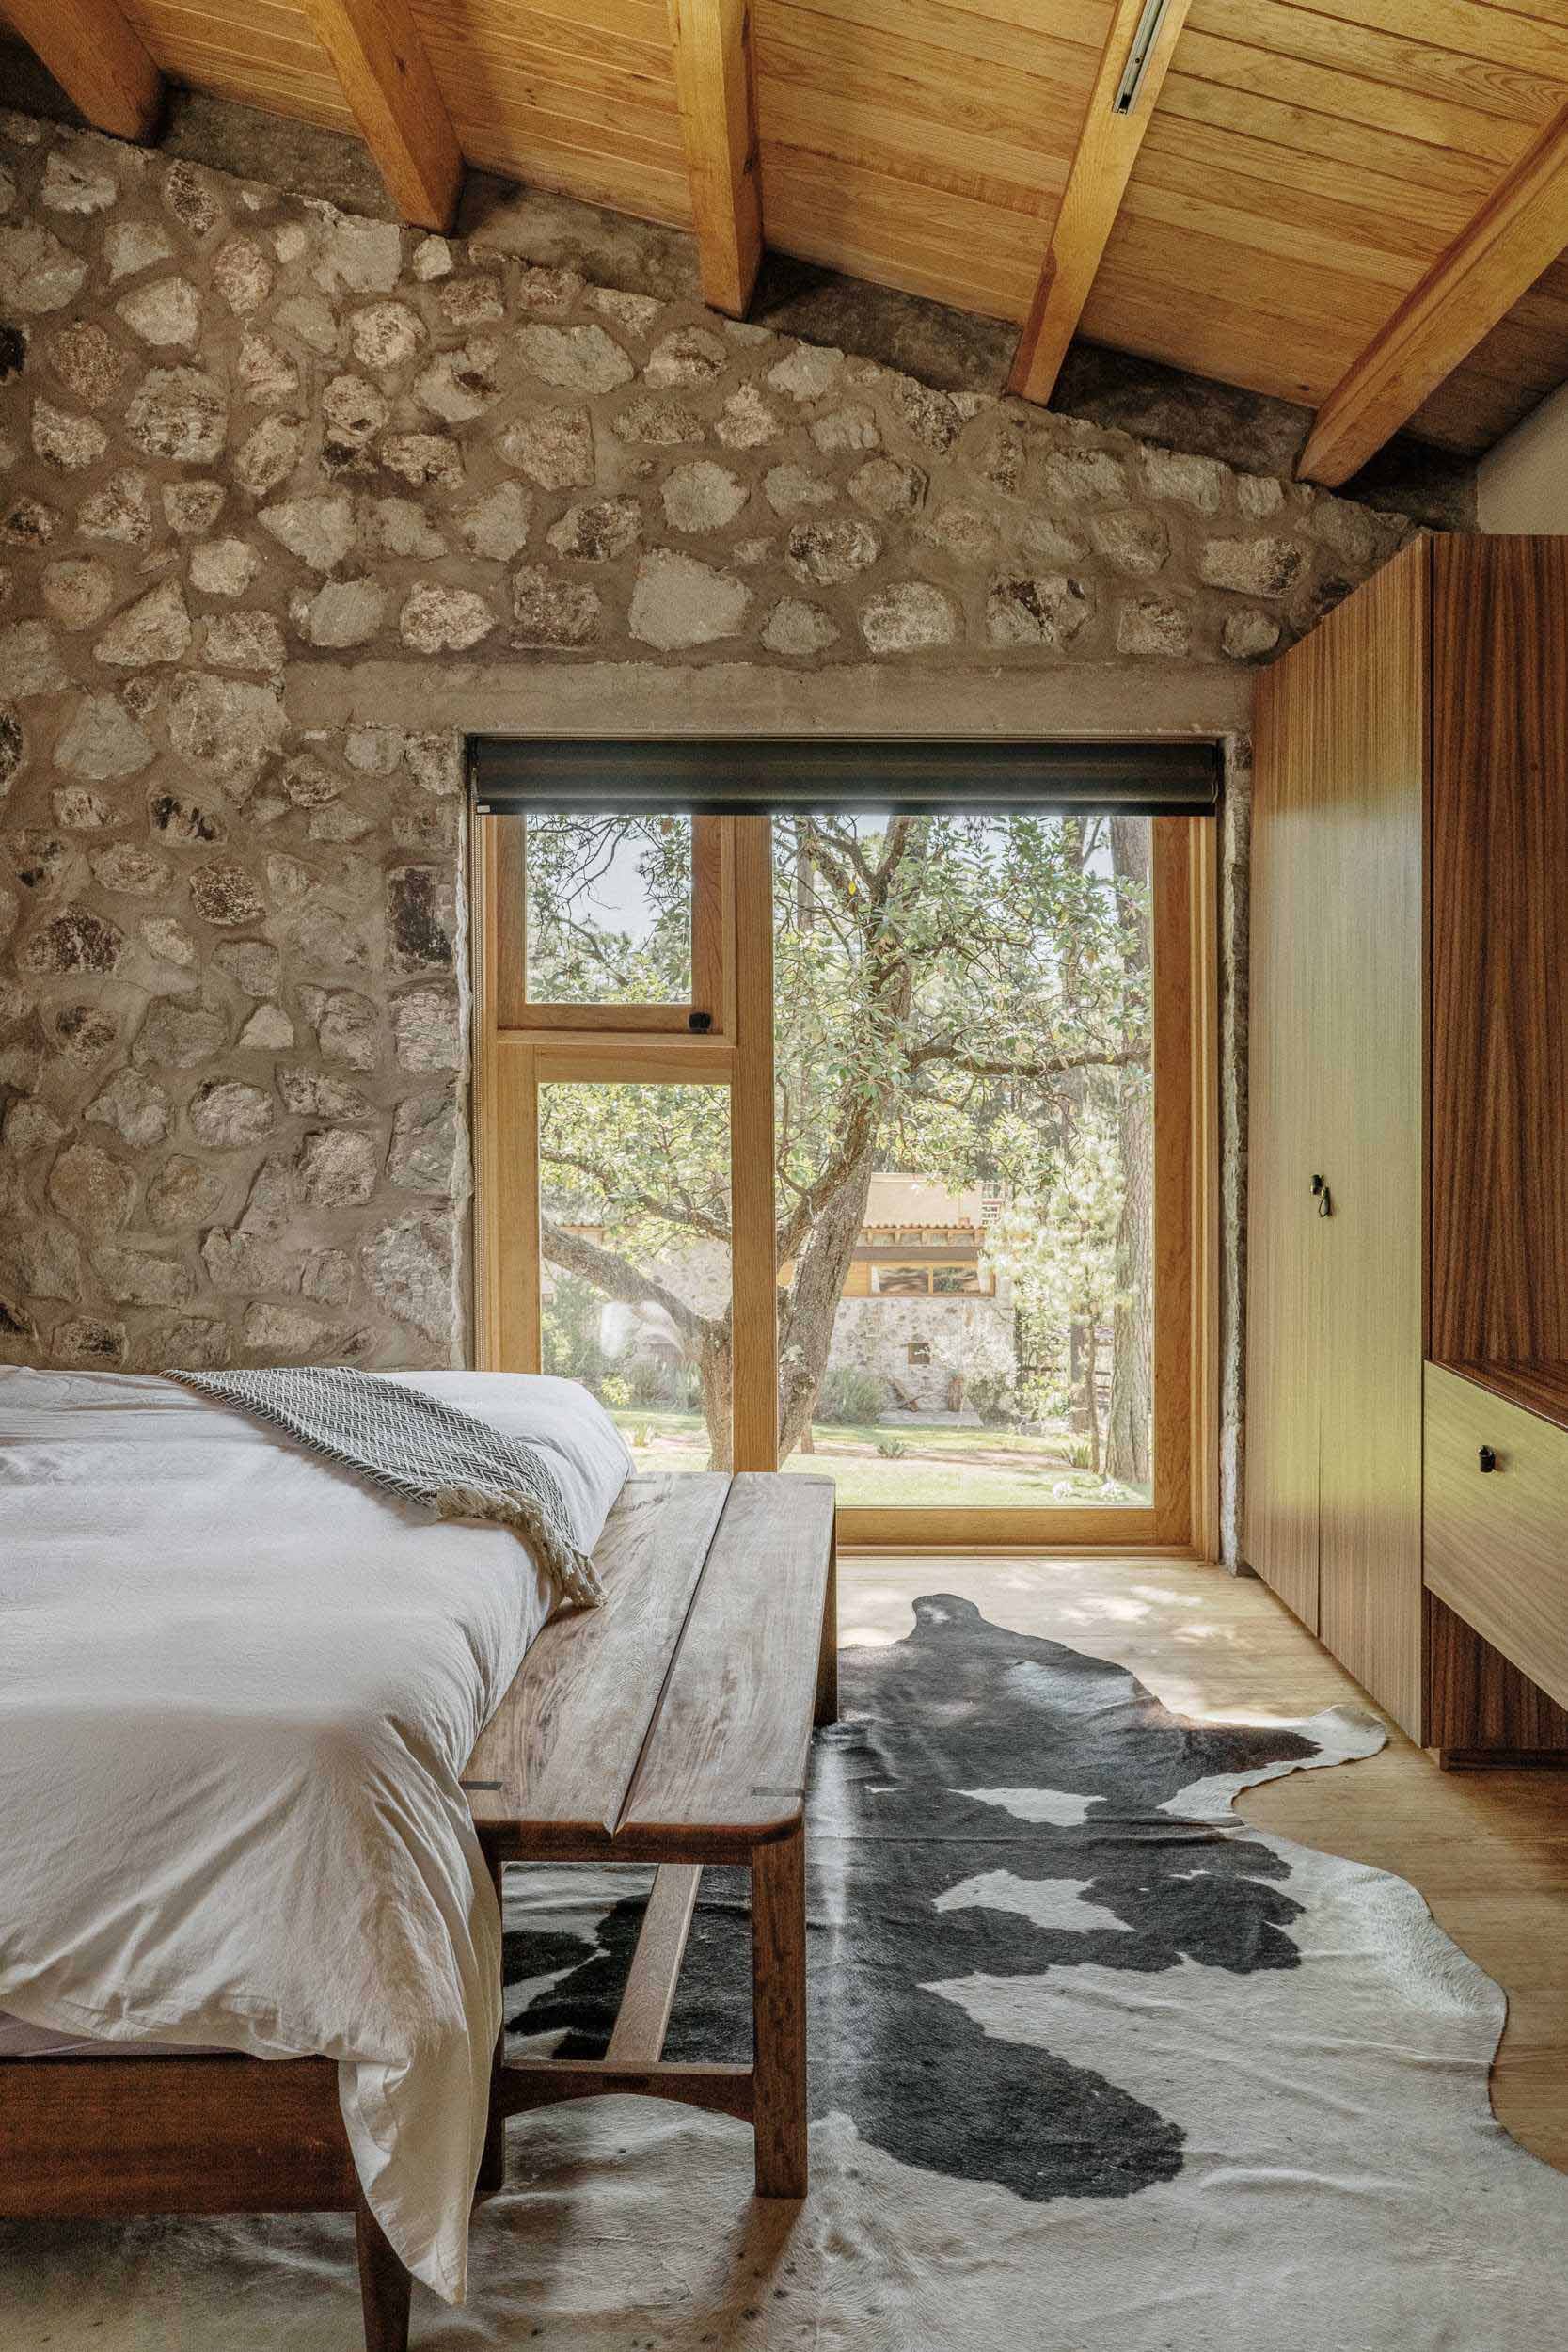 A modern stone and wood bedroom with treetop views.